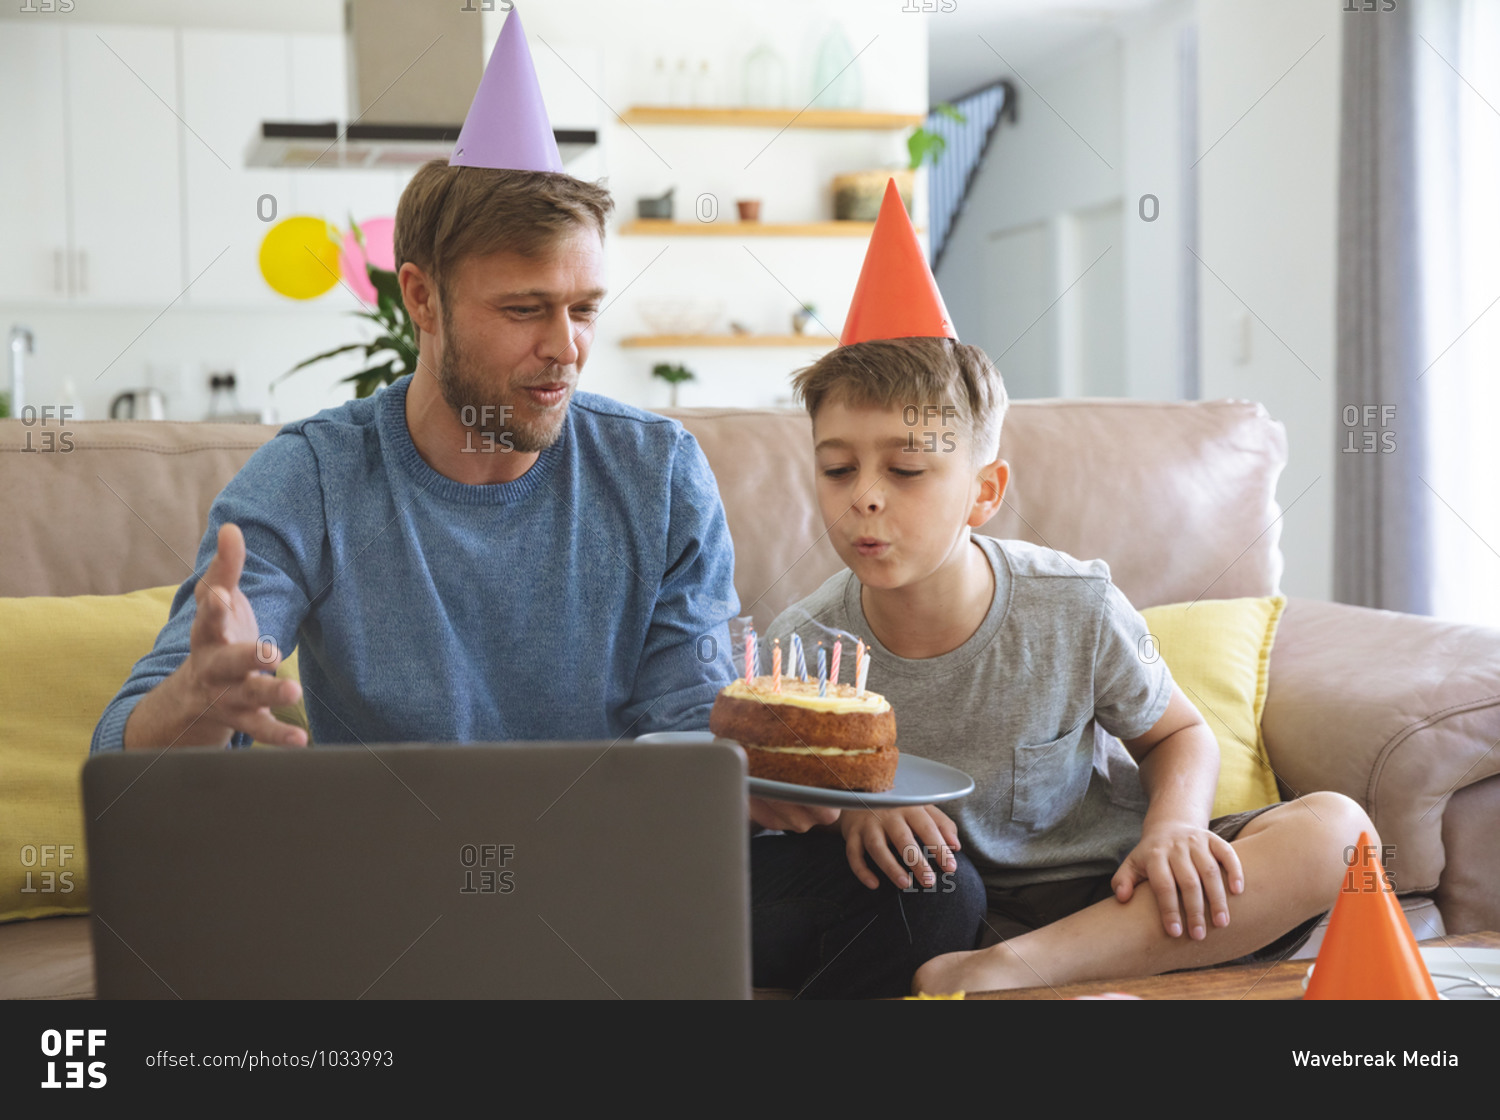 Caucasian man spending time at home with his son together, blowing candles on  birthday cake using laptop computer for video chat. Social distancing during Covid 19 Coronavirus quarantine lockdown.